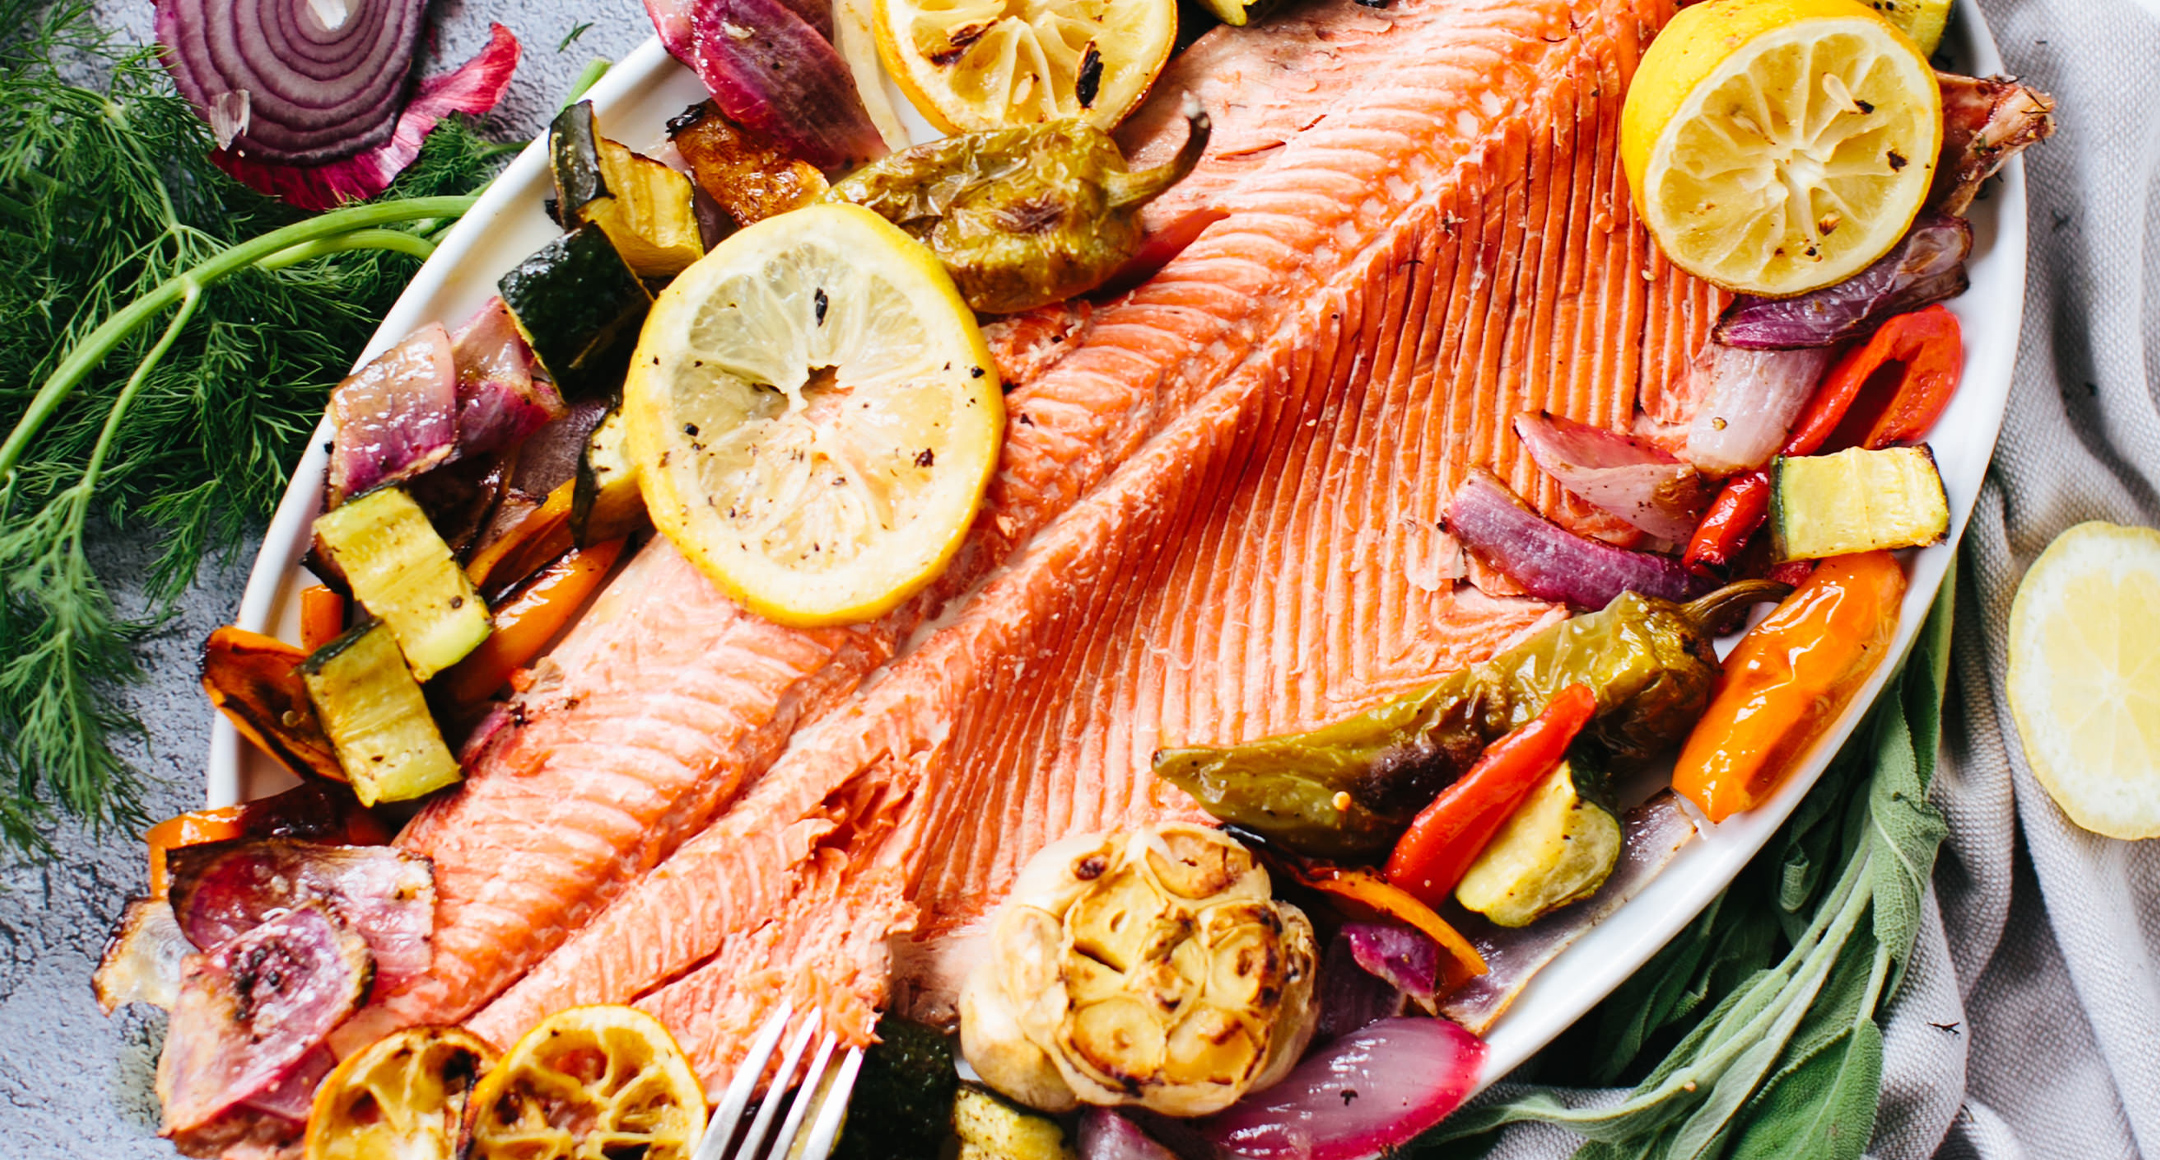 A flaky trout fillet on a platter with a bulb or roasted garlic, sliced lemon, and chopped roasted veggies around the sides.